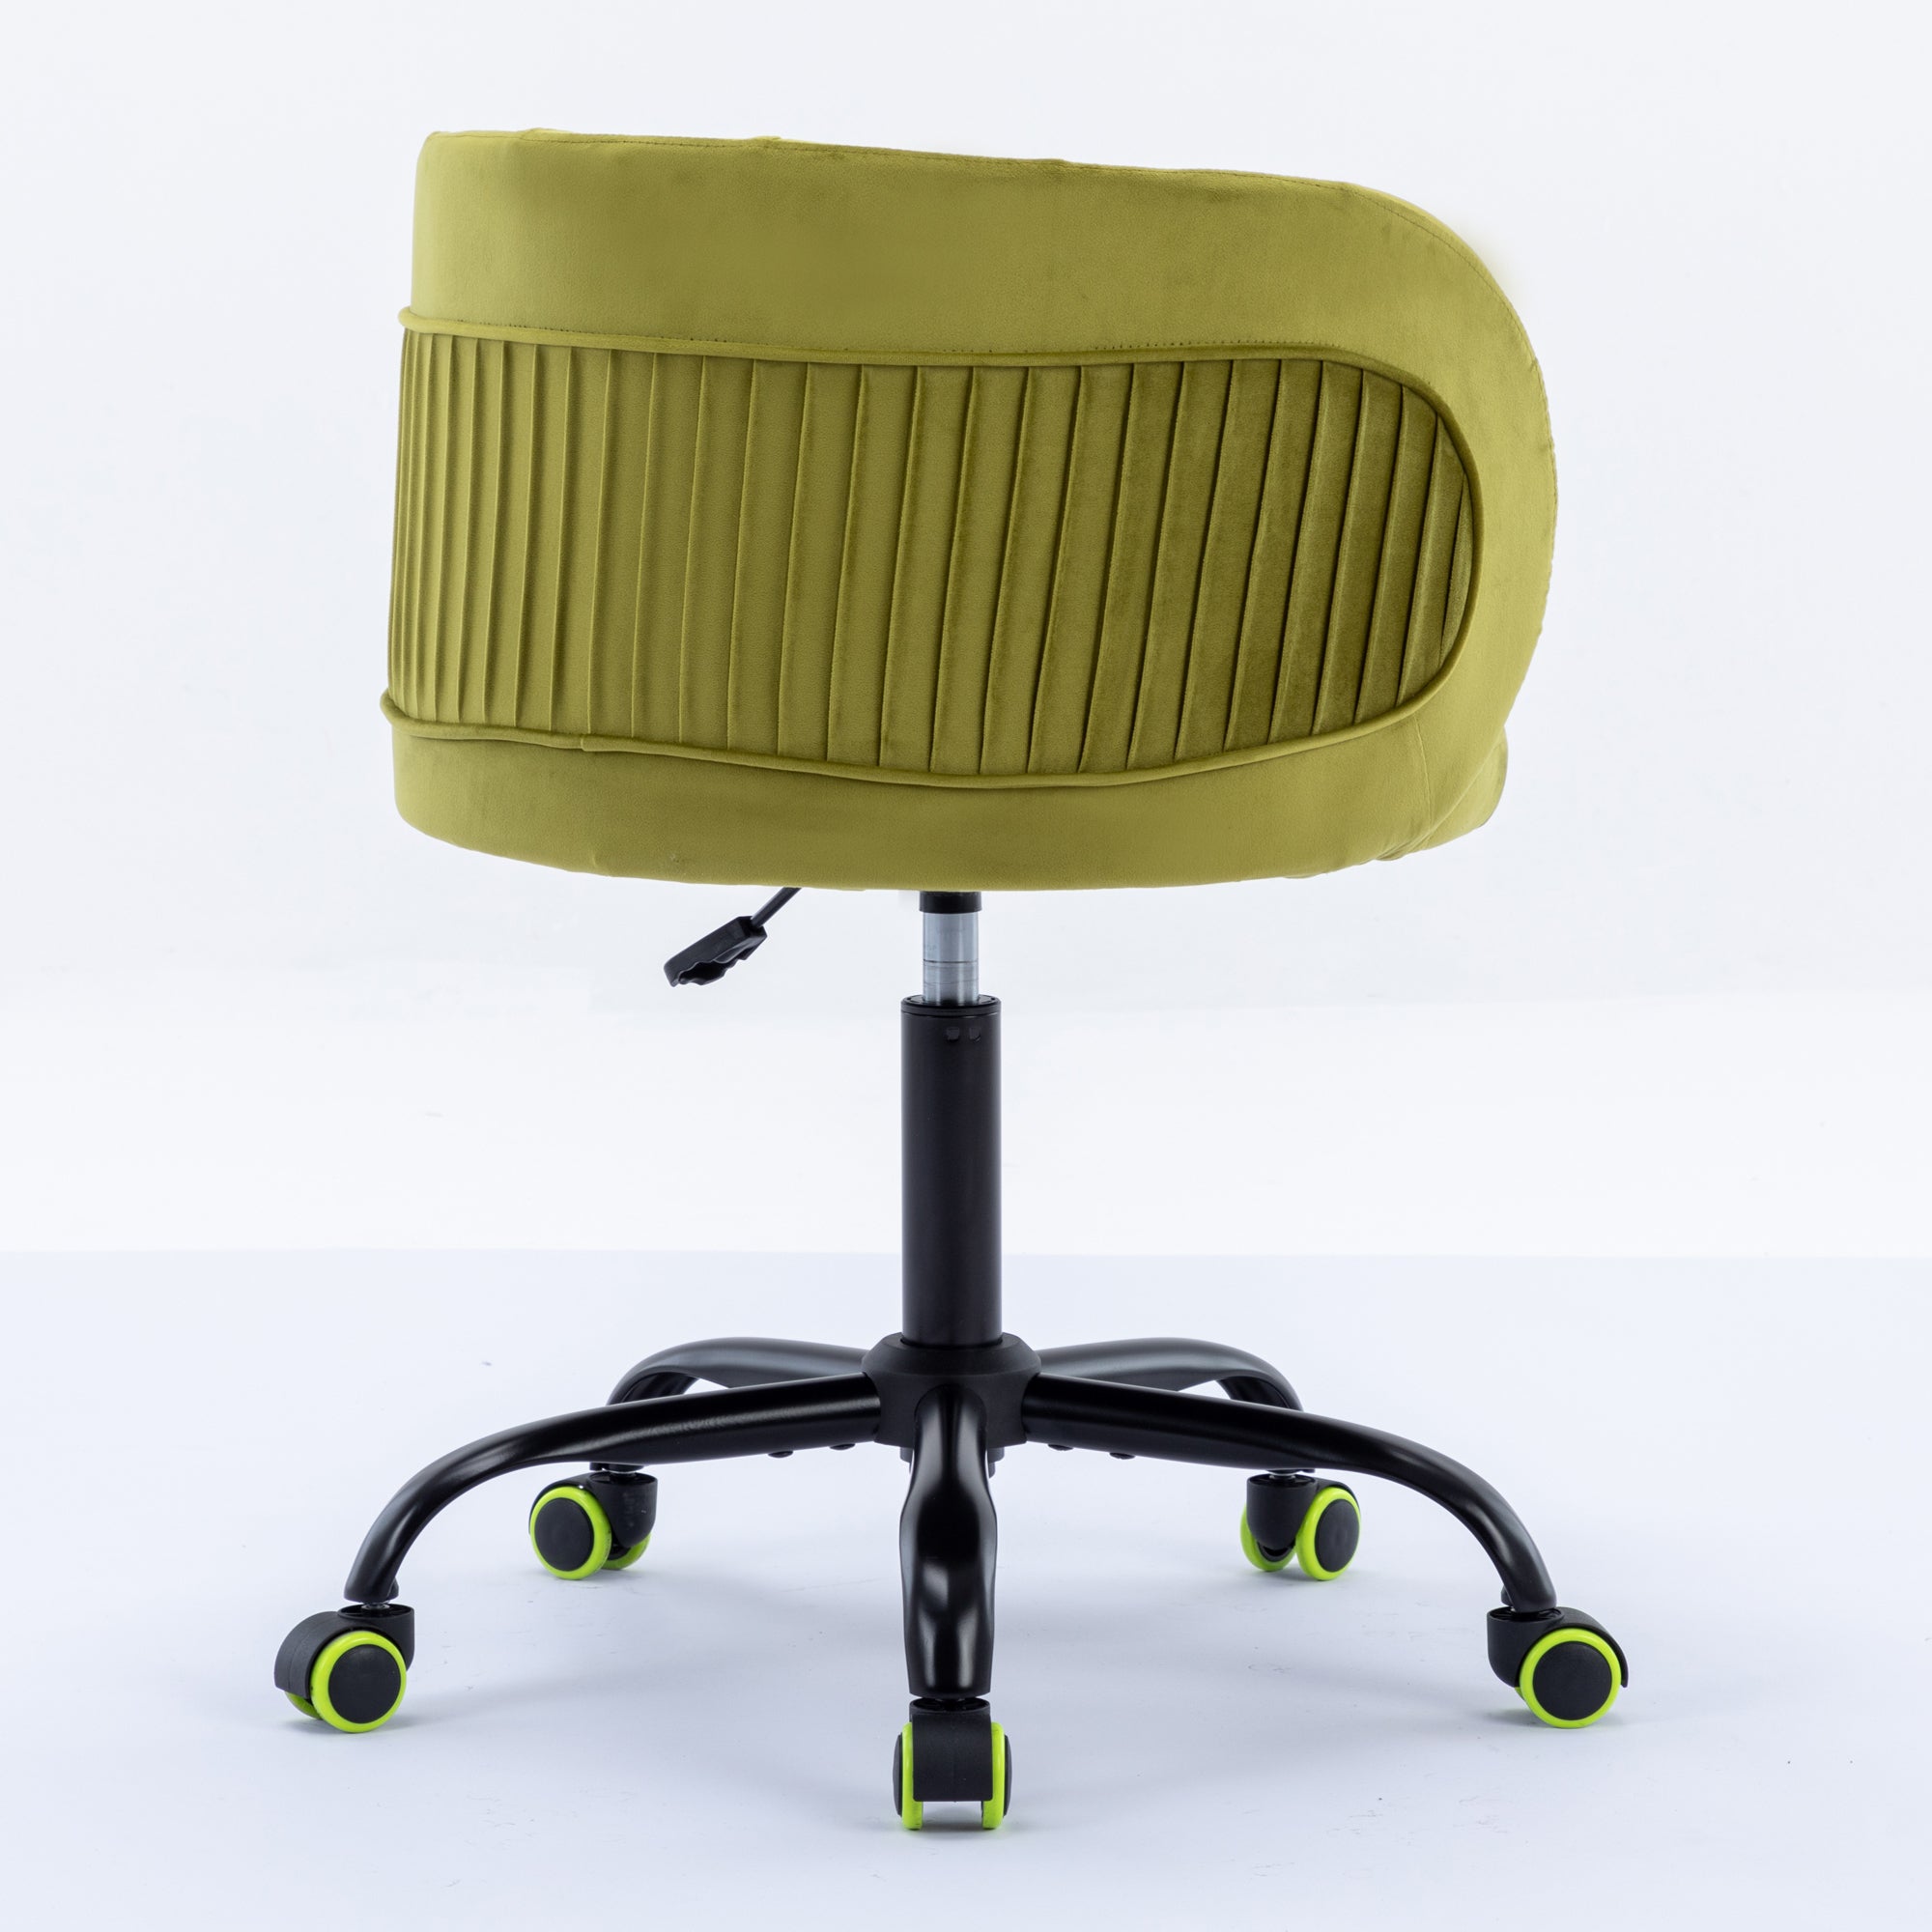 Zen Zone Velvet Leisure Office Chair, can rotate 360 degrees, with pulley - Olive Green